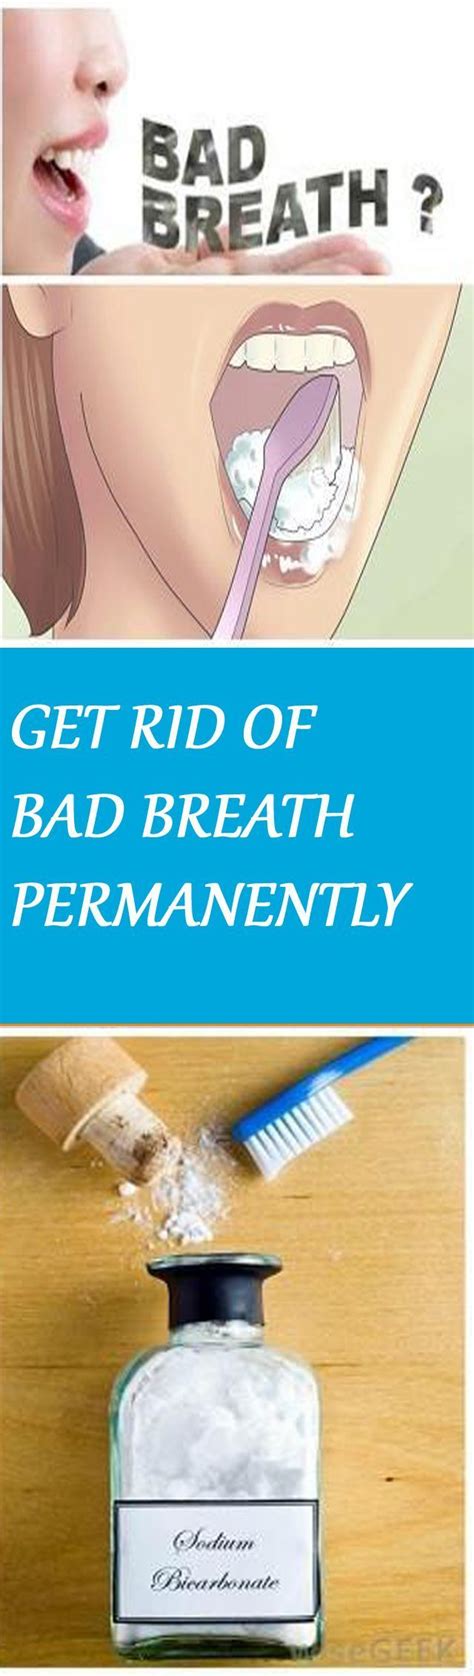 get rid of bad breath permanently with just 1 simple ingredient bad breath bad breath remedy